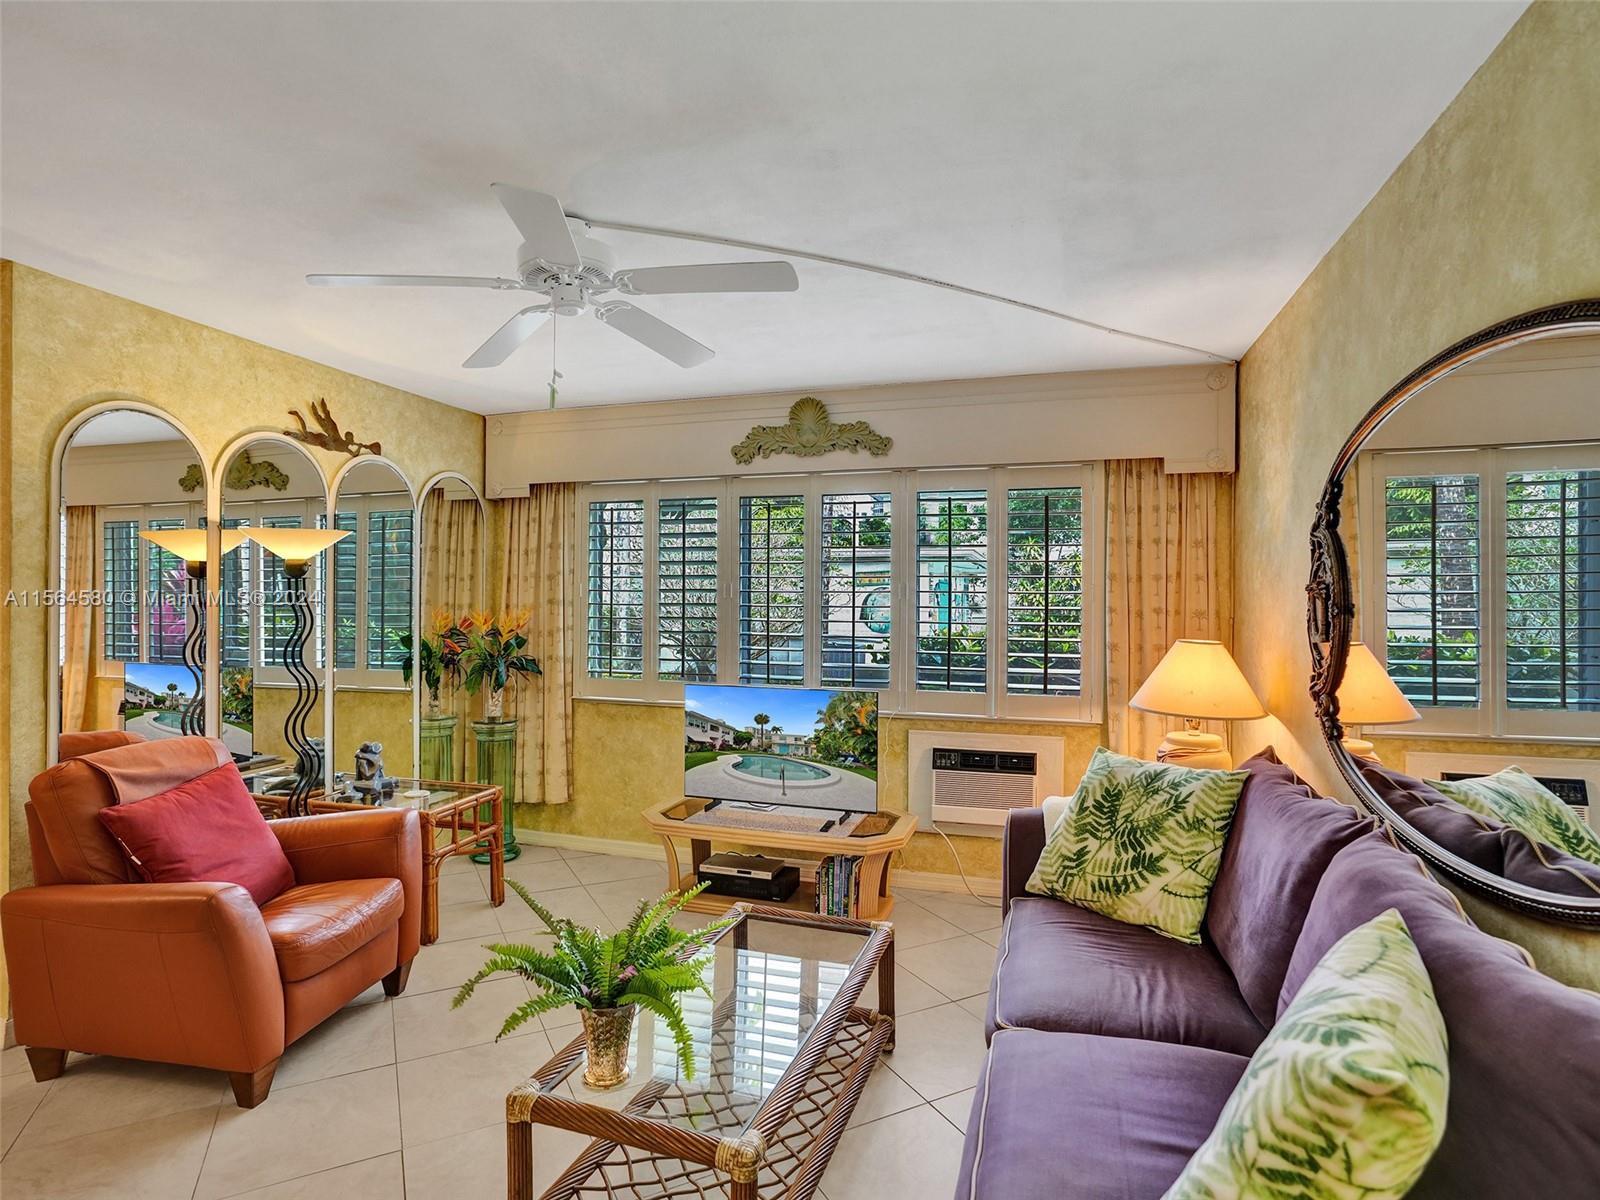 This two-bedroom, one-bathroom corner unit is ideally located just four blocks from Fort Lauderdale 